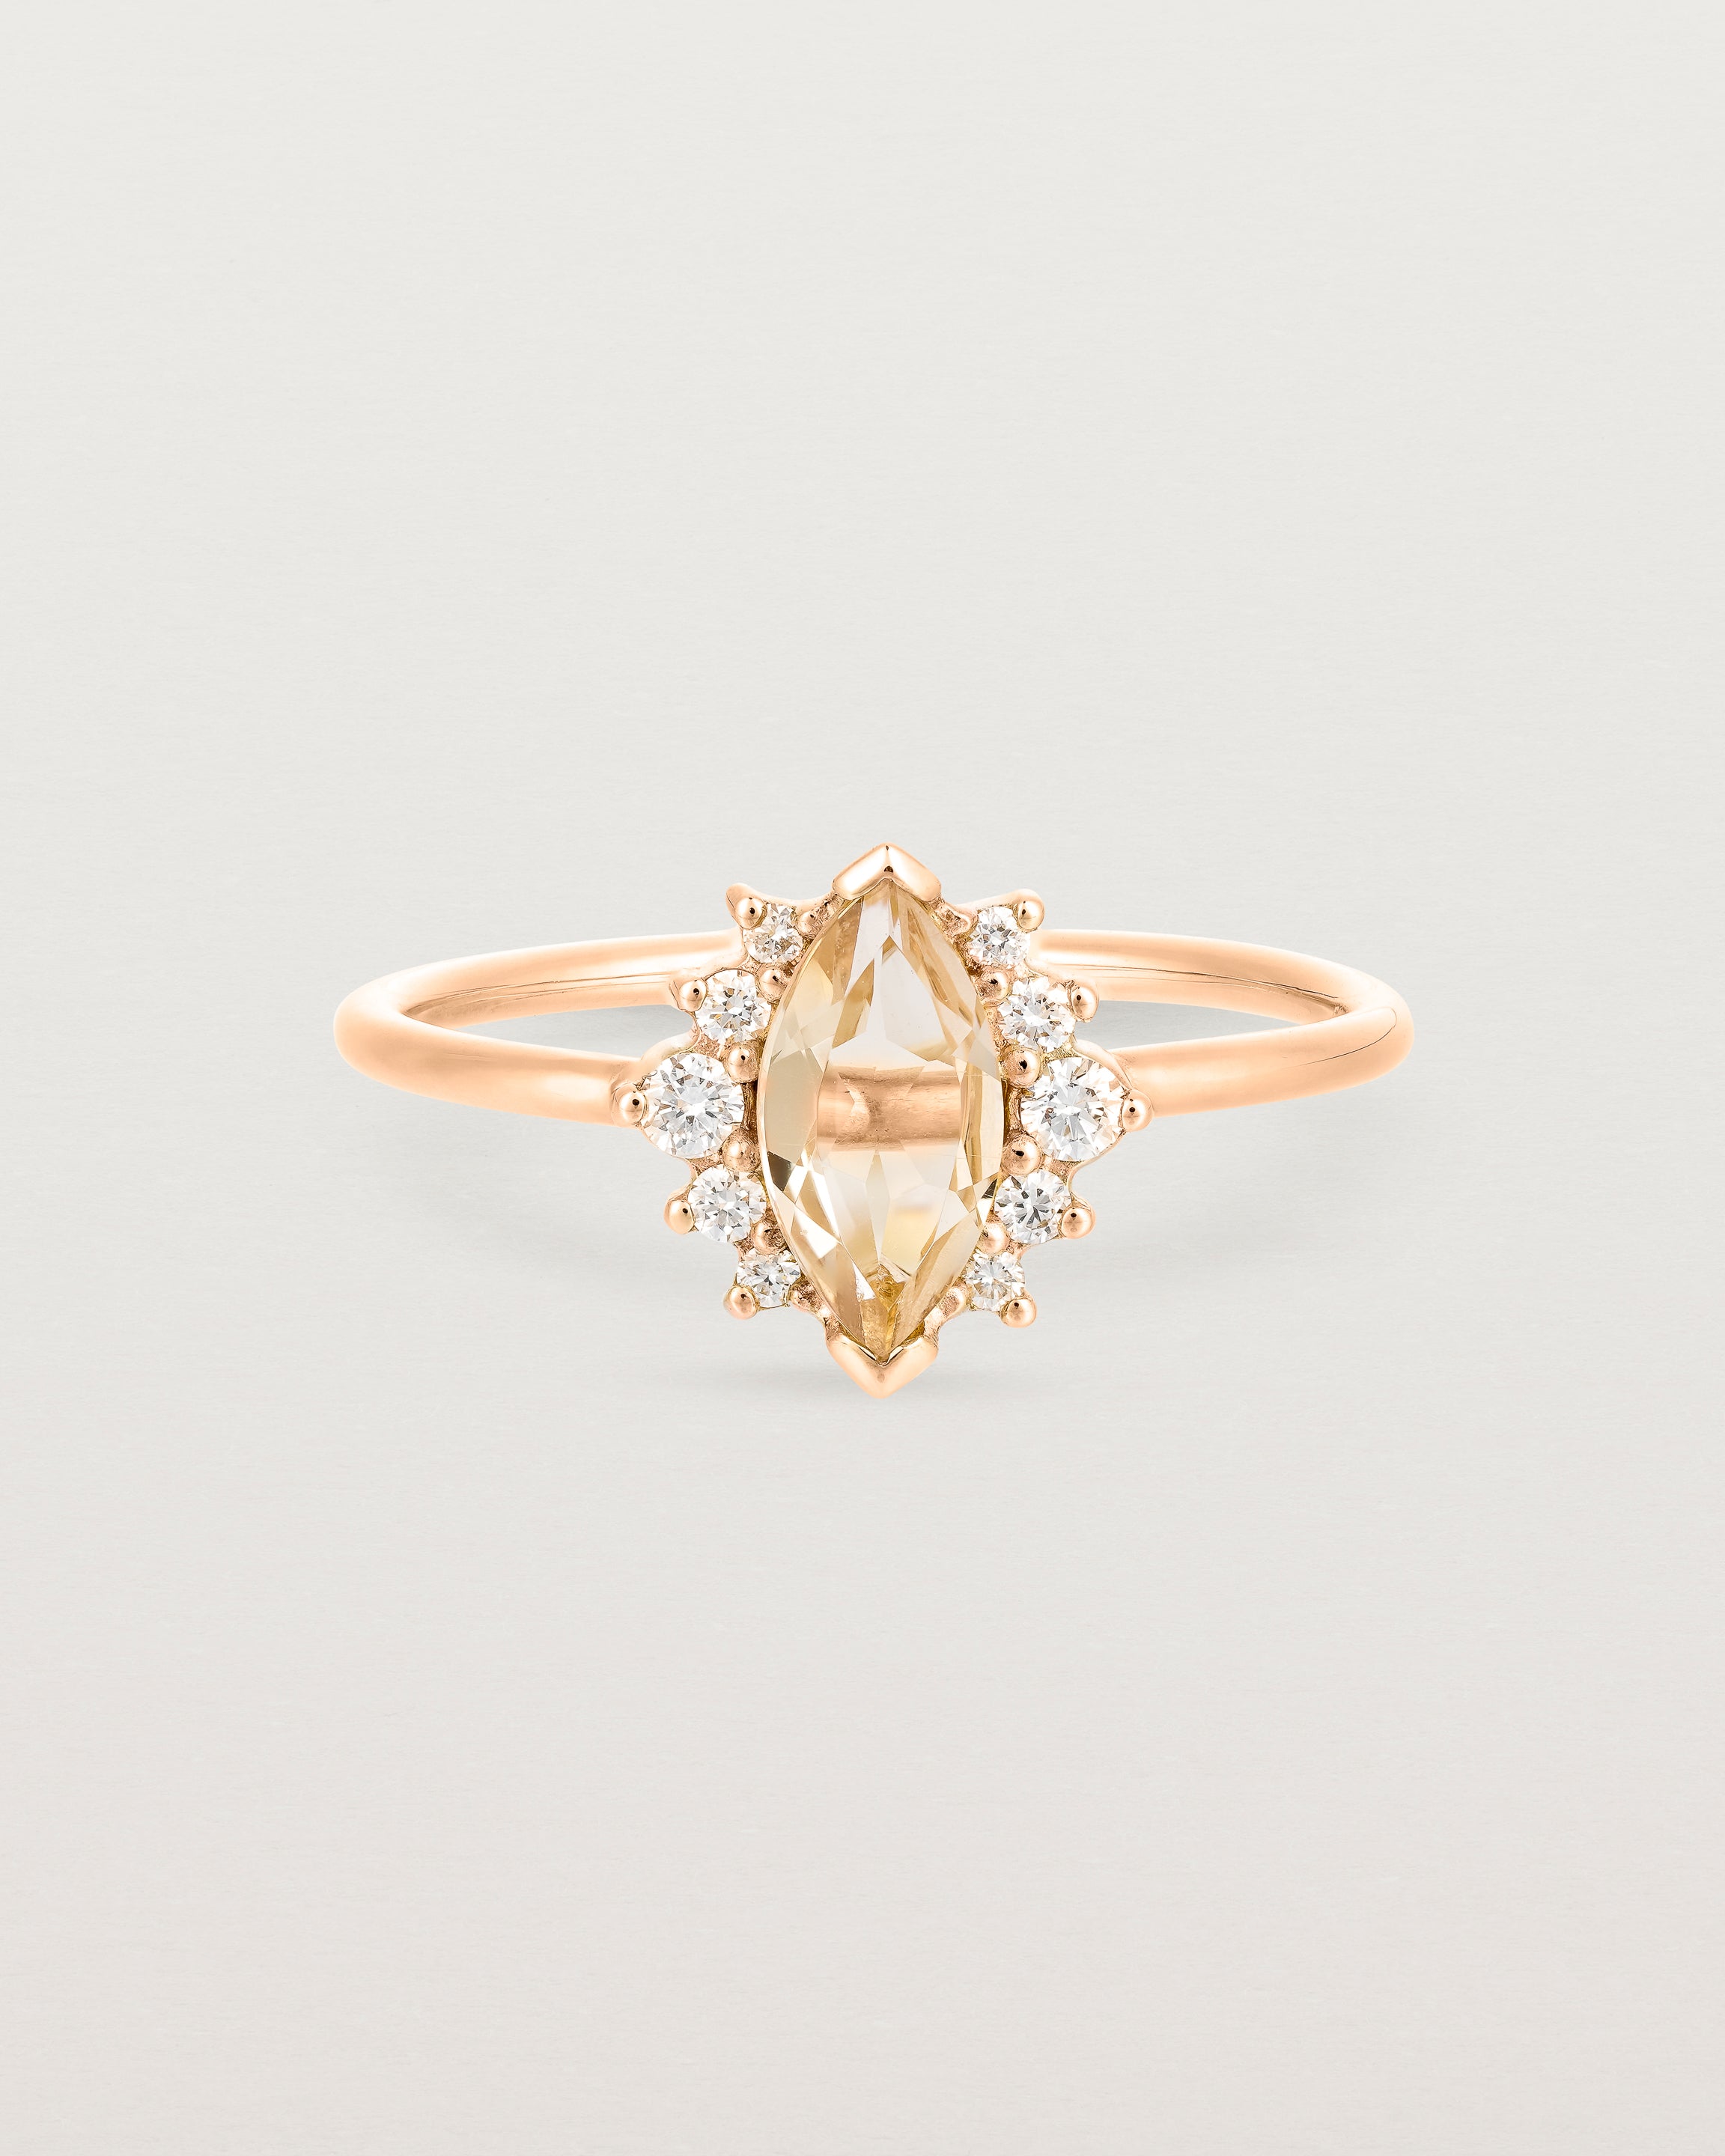 A rose gold ring featuring a marquise champagne quartz with a halo of white diamonds